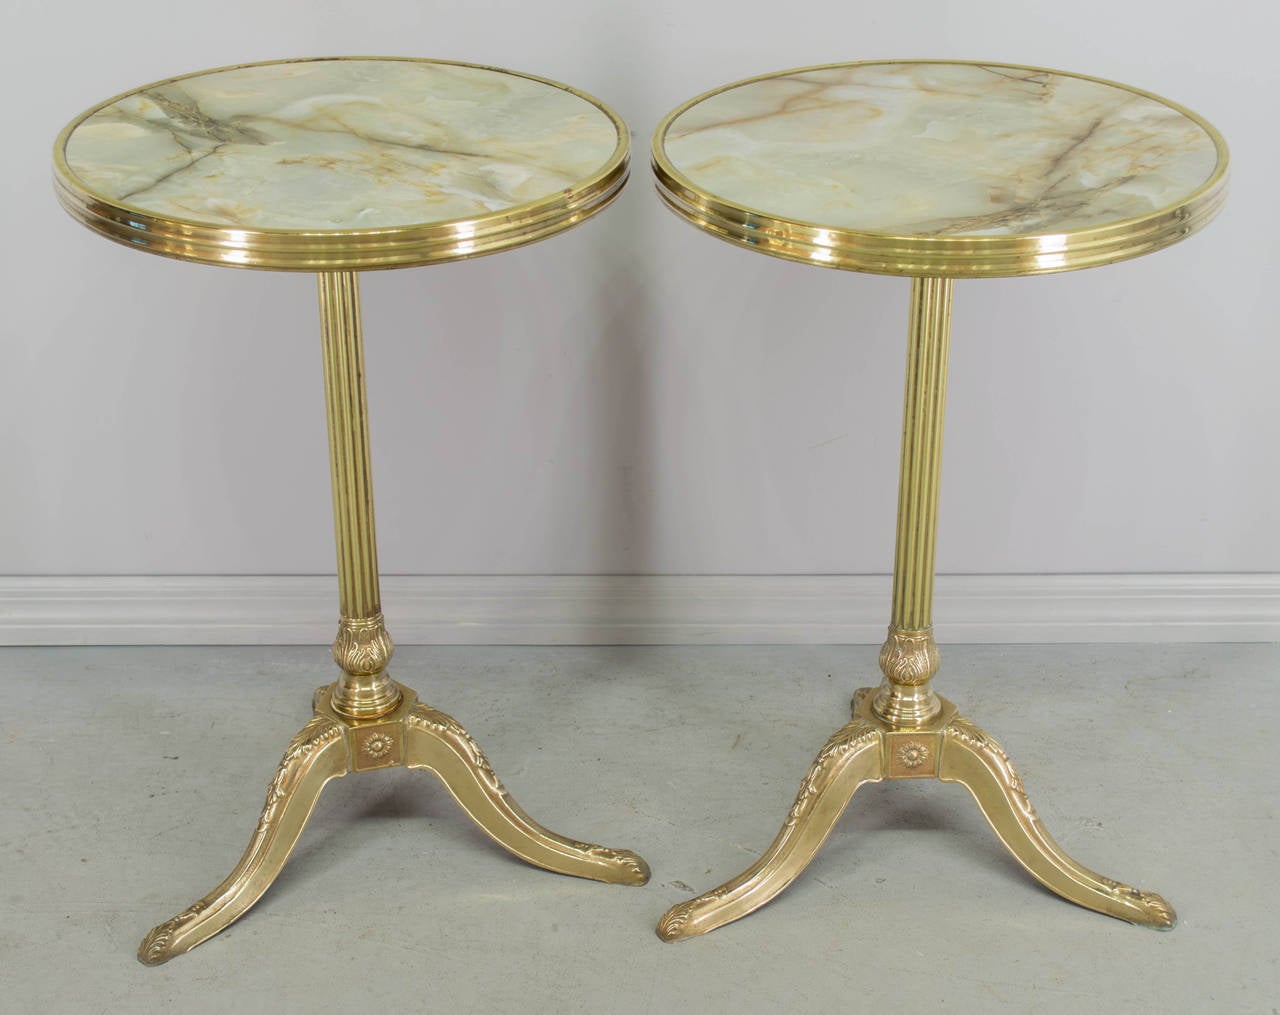 Pair of French bistro tables from a Paris cafe. Each table with a solid polished cast brass base and faux marble Formica top. Unusual that these tables are made of brass, as cast iron was more common. As always, more photos available upon request.